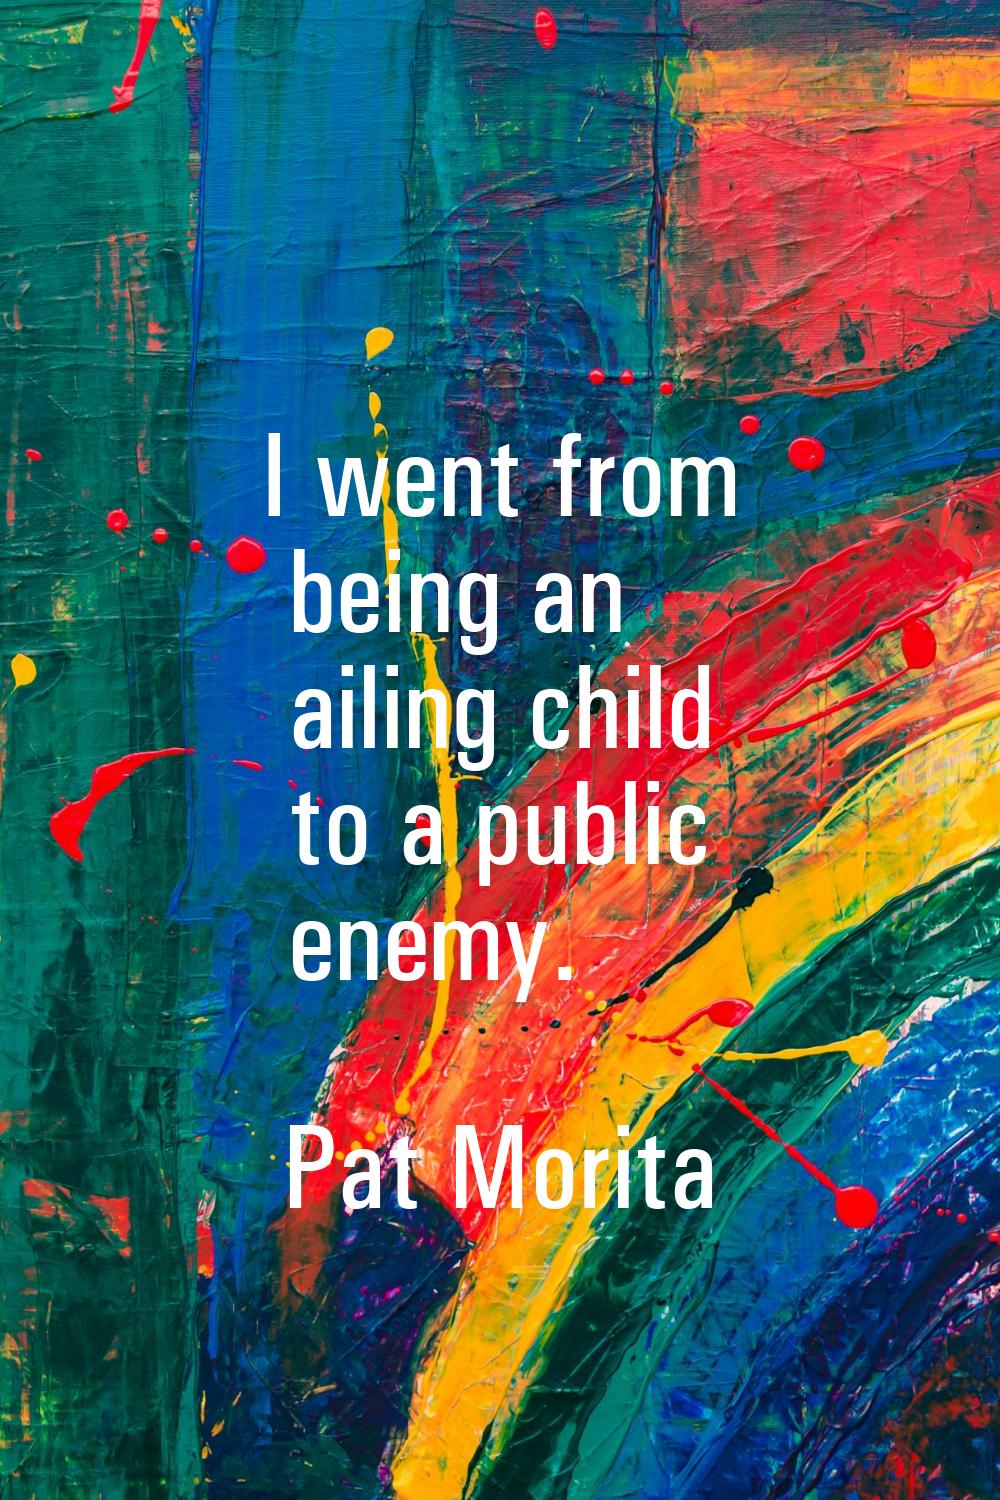 I went from being an ailing child to a public enemy.